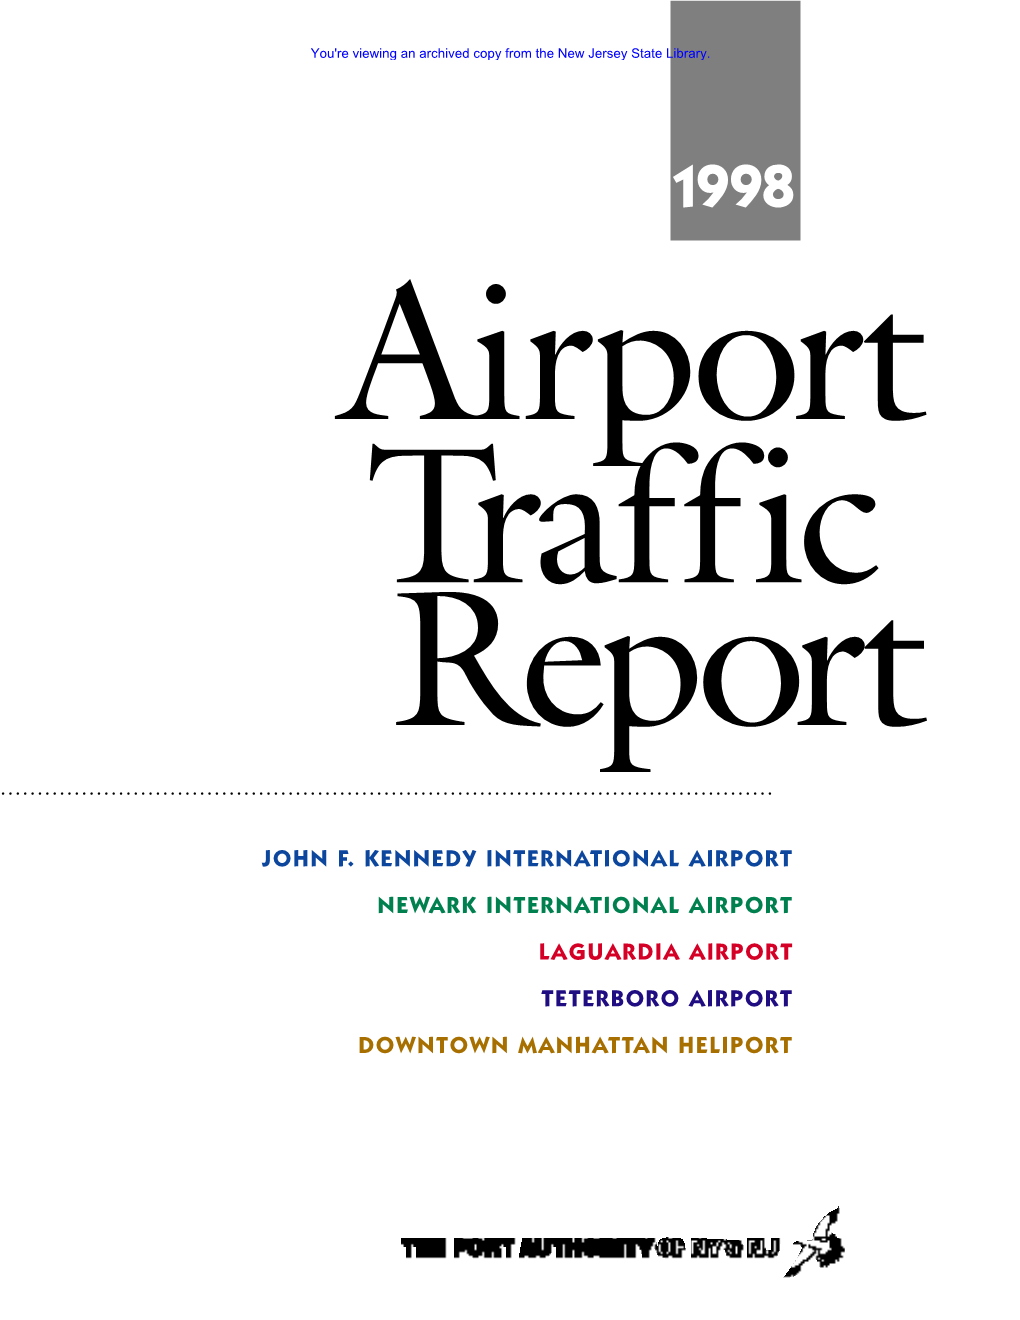 LAGUARDIA AIRPORT TETERBORO AIRPORT DOWNTOWN MANHATTAN HELIPORT You're Viewing an Archived Copy from the New Jersey State Library